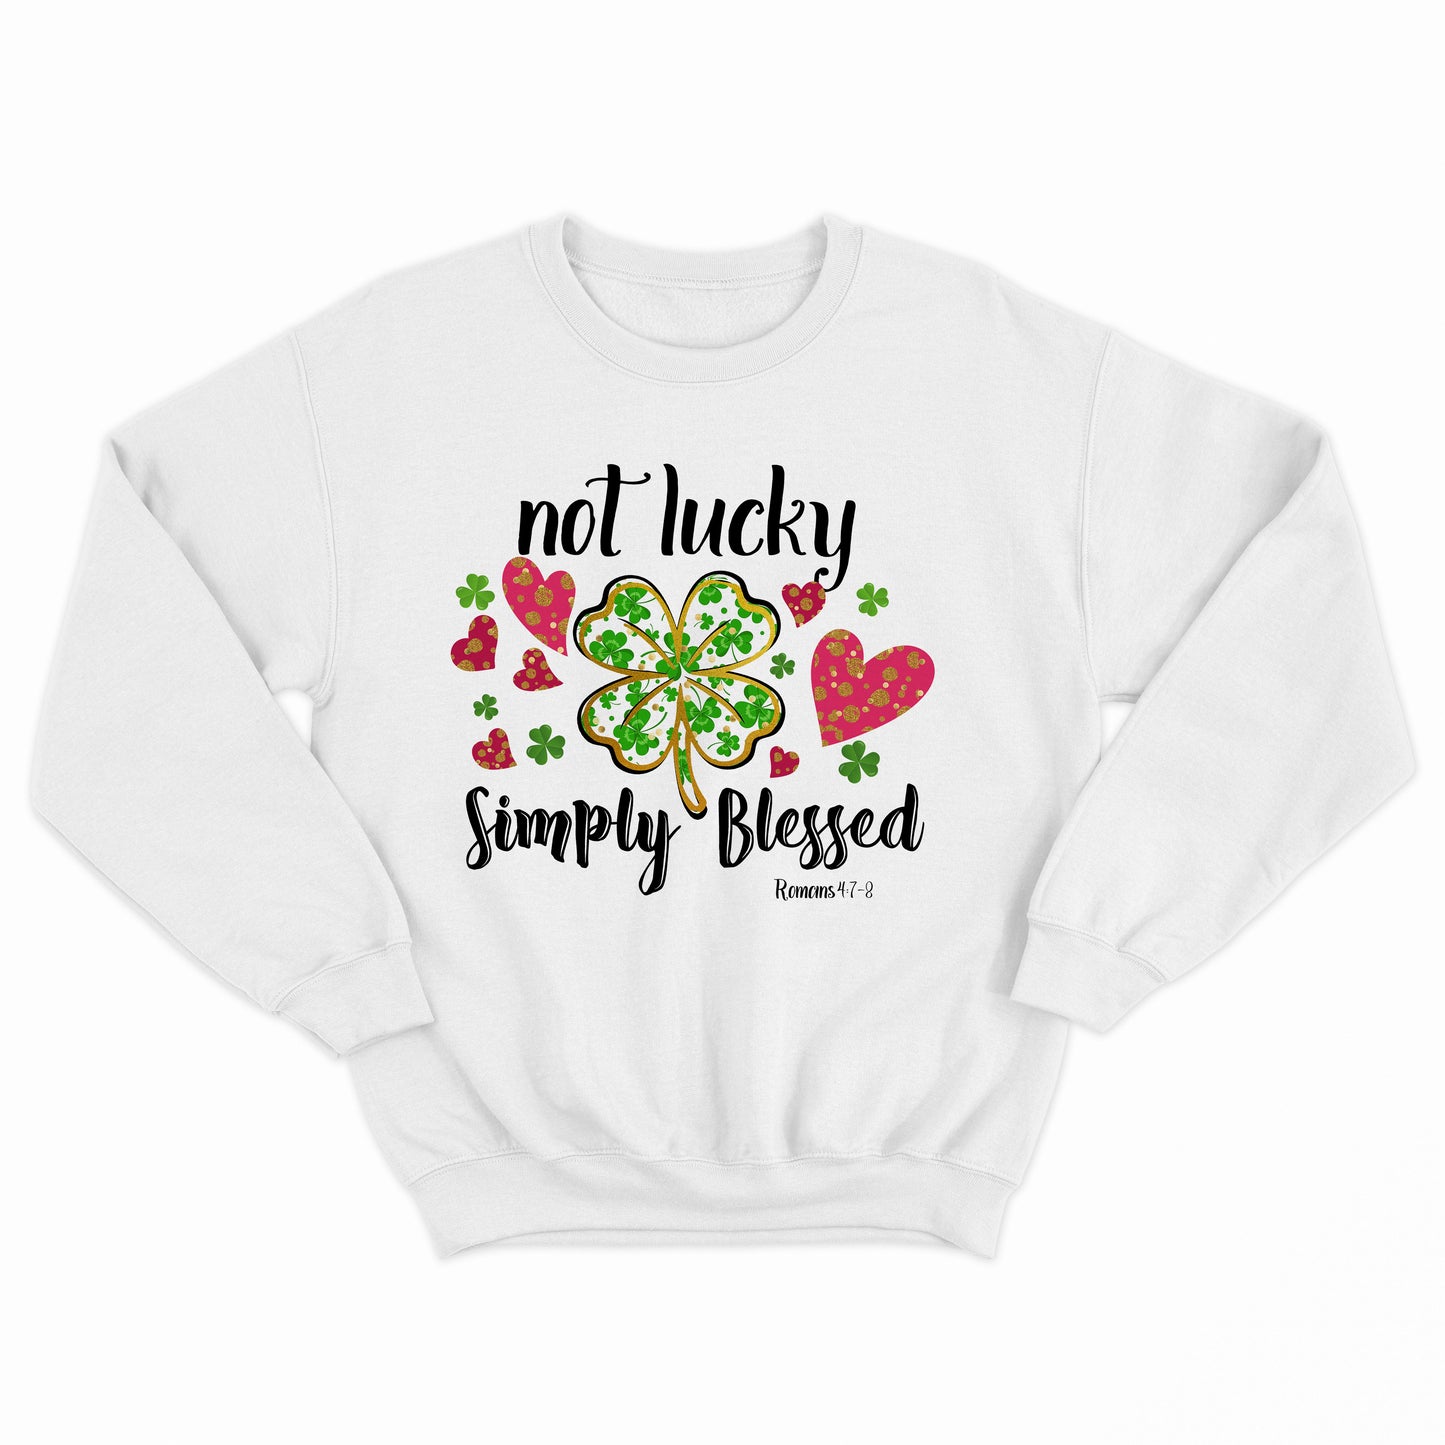 Not Lucky Simply Blessed St Patrick's Day Shirt, Four Leaf Clover Shirt, St Patrick’s Day Shirt, Clover Heart Shirt, Lucky and Blessed Shirt